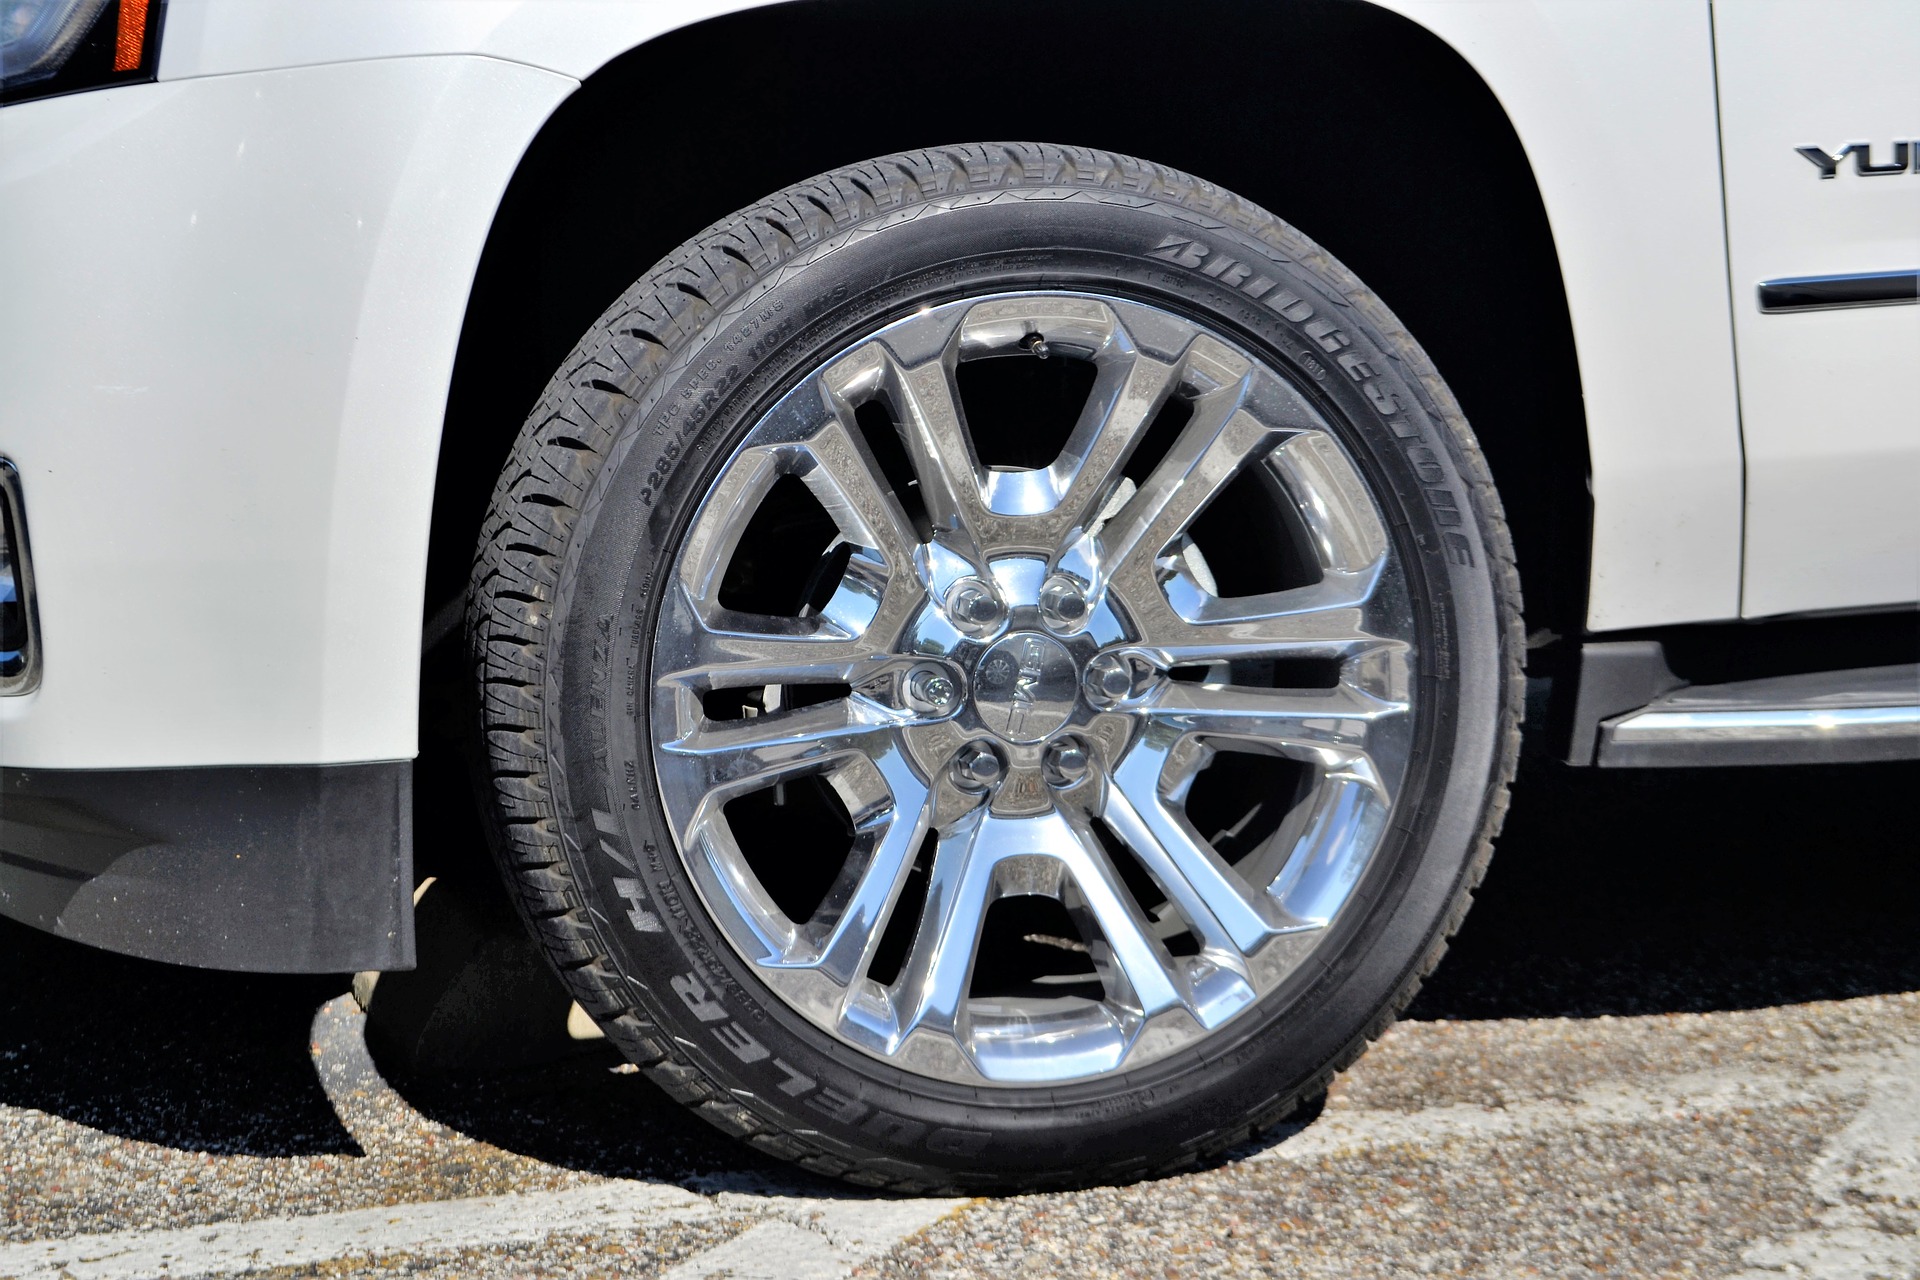 GM Has Strict Guidelines for Refinishing Wheels